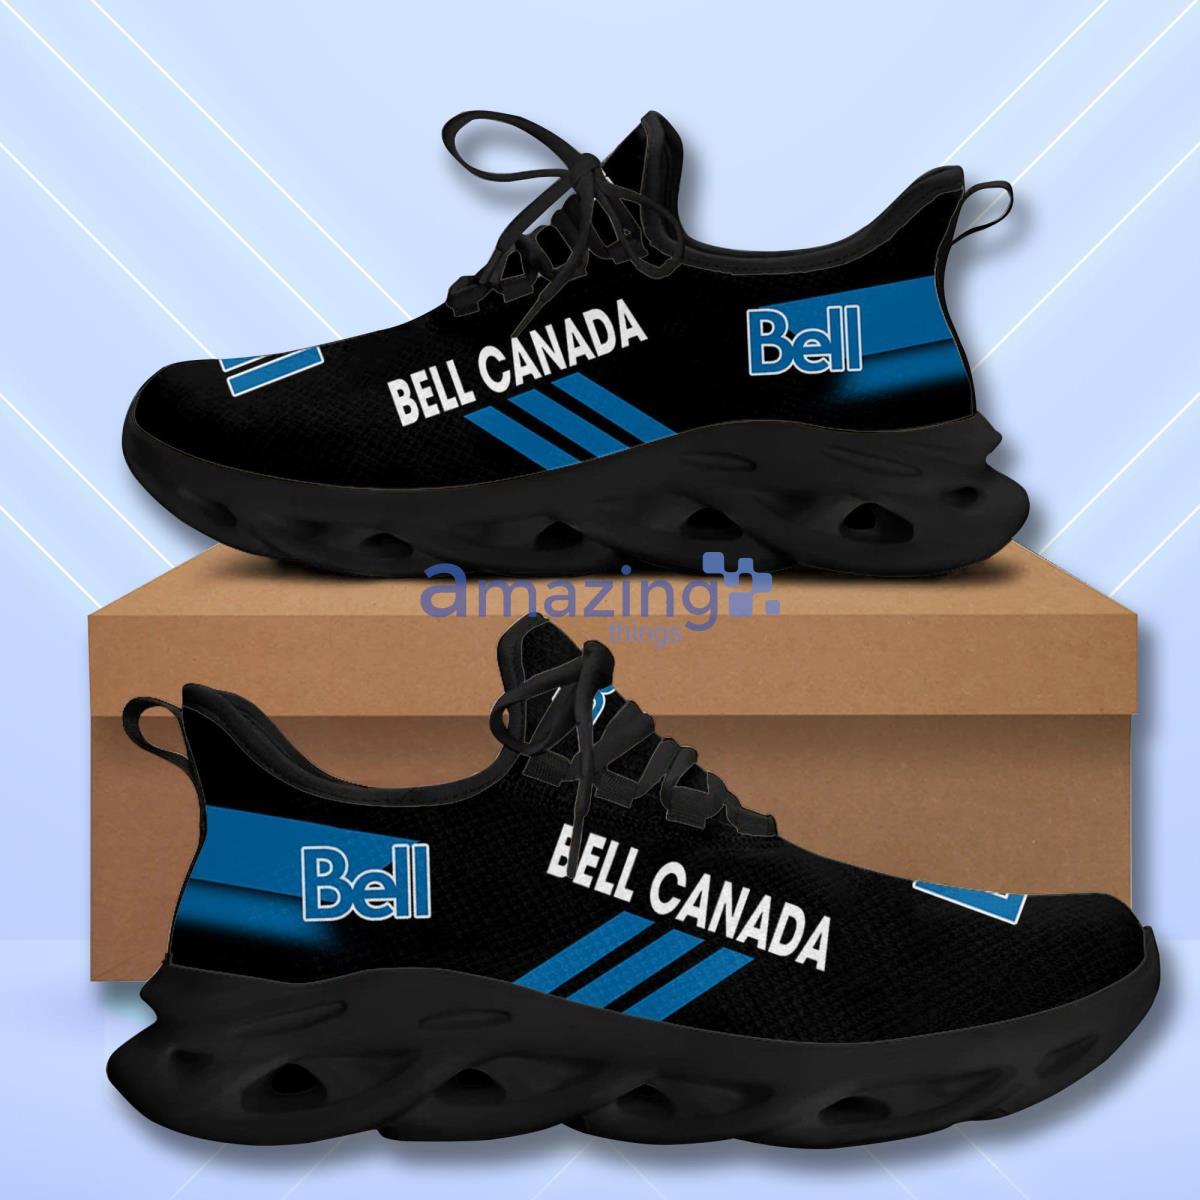 Bell Canada Max Soul Shoes Hot Trending Gift For Men Women Product Photo 1